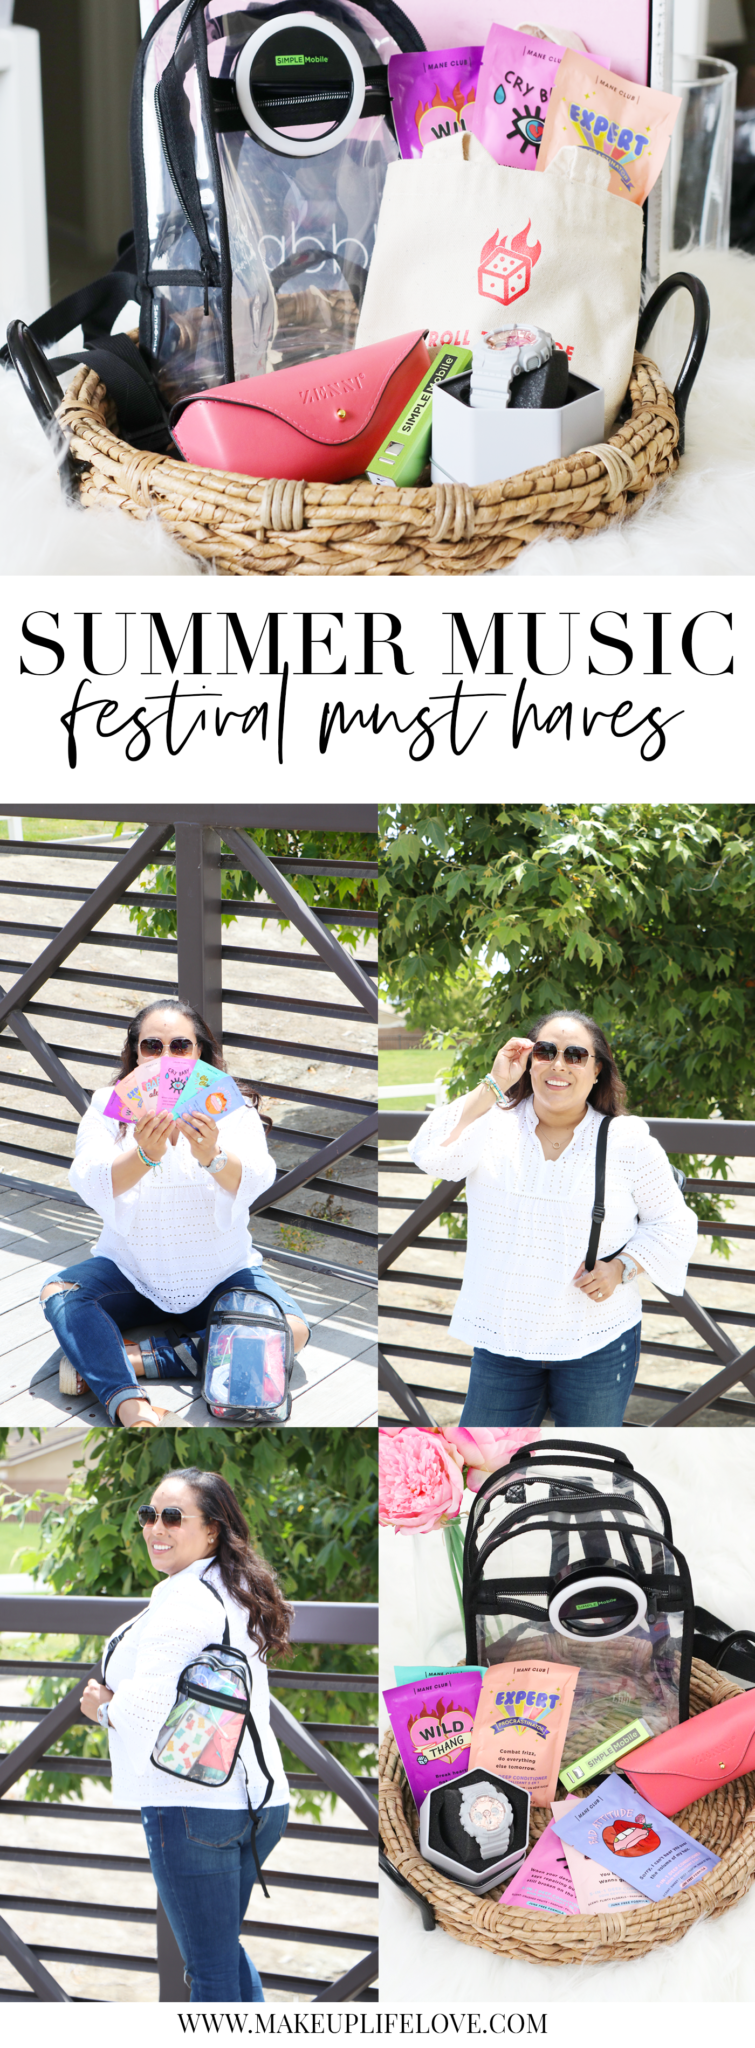 Headed to any festivals this season? Lifestyle blogger Makeup Life and Love is sharing her top summer festival necessities. See them HERE!